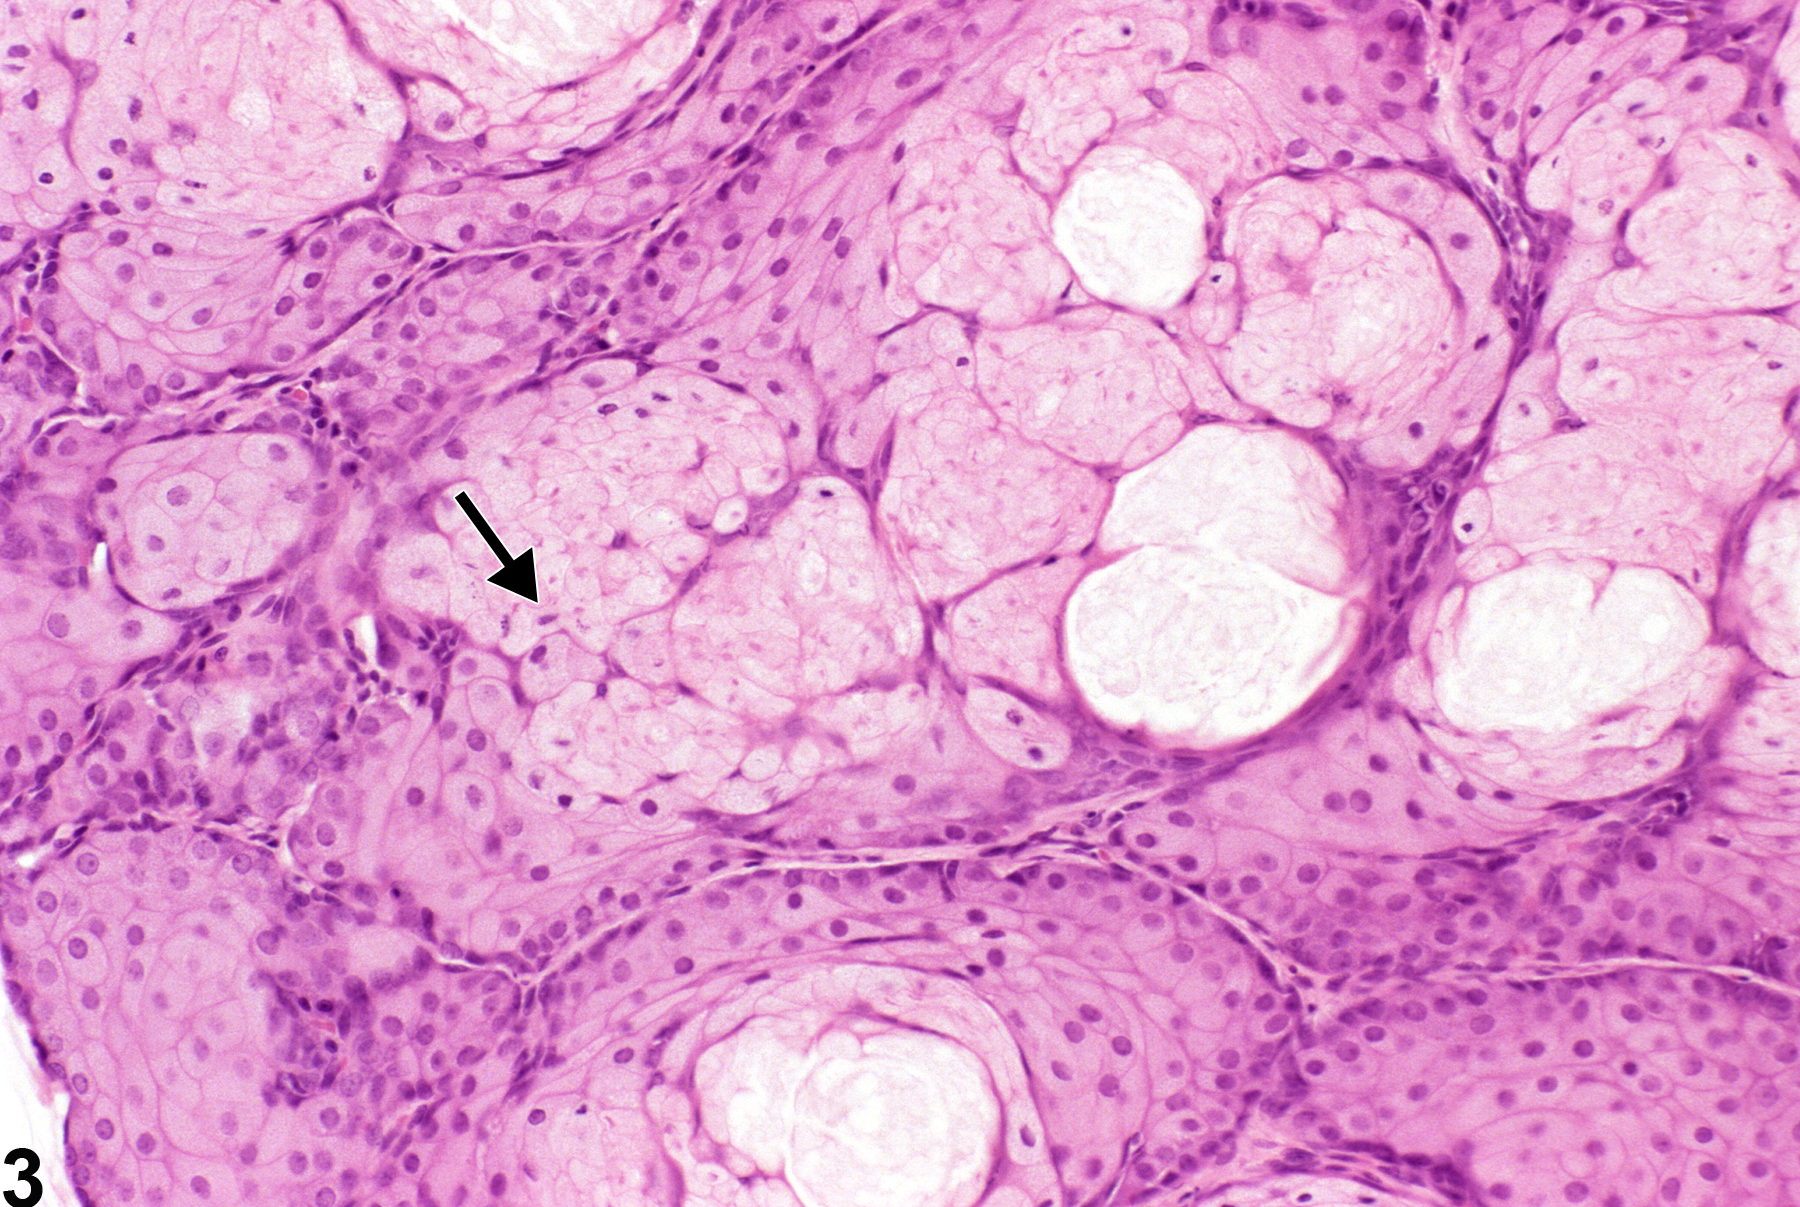 Image of hypertrophy in the Zymbal's gland from a female F344/N rat in a chronic study